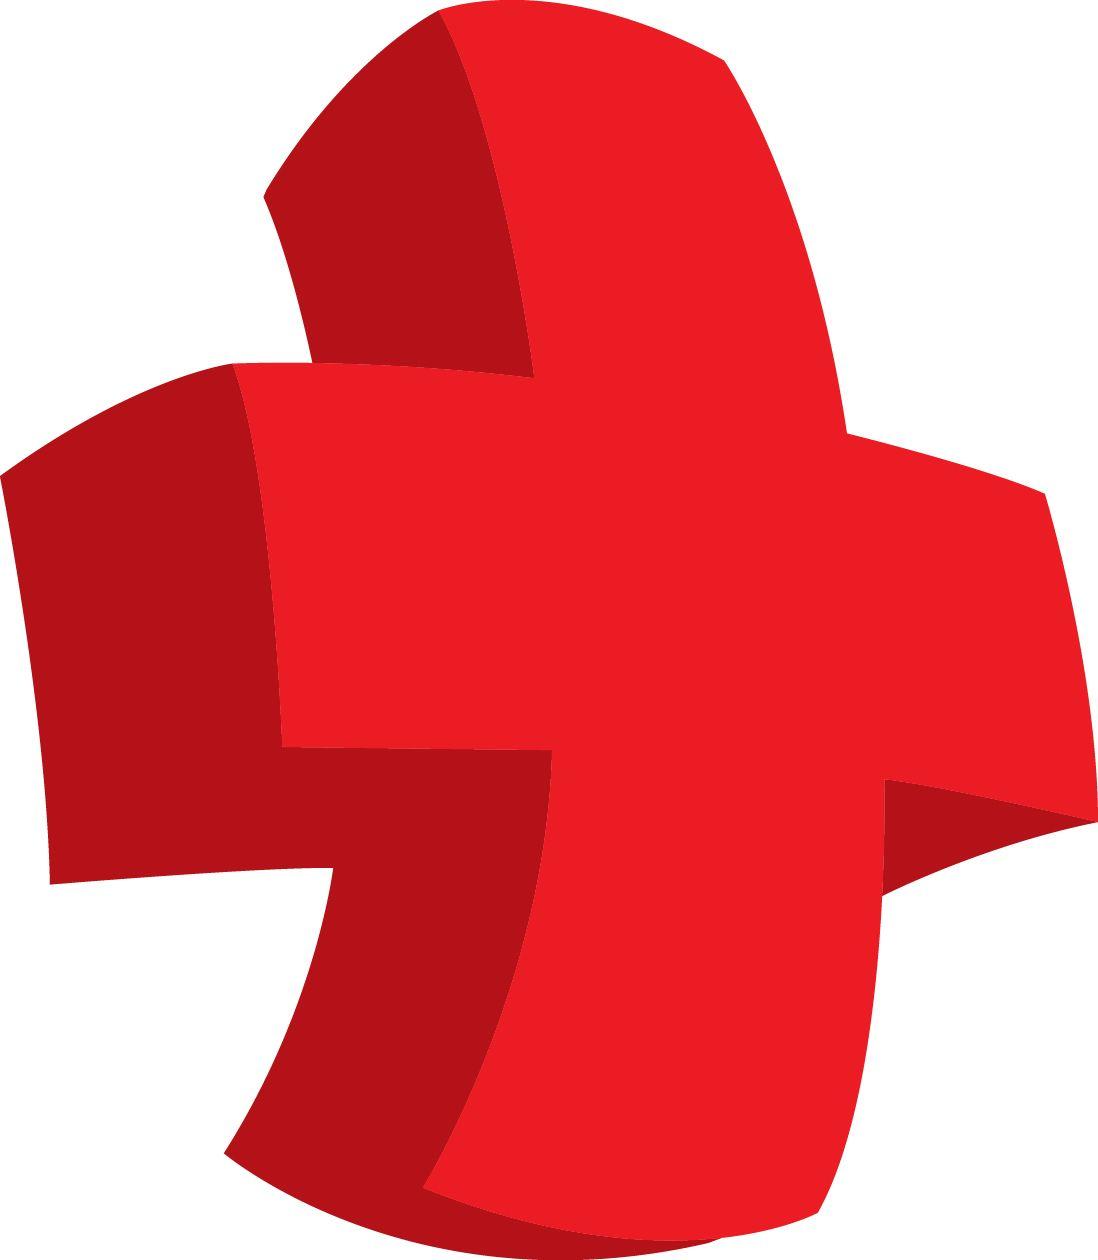 Red Block with White Cross Logo - Logo Of Red Square With White Cross & Vector Design